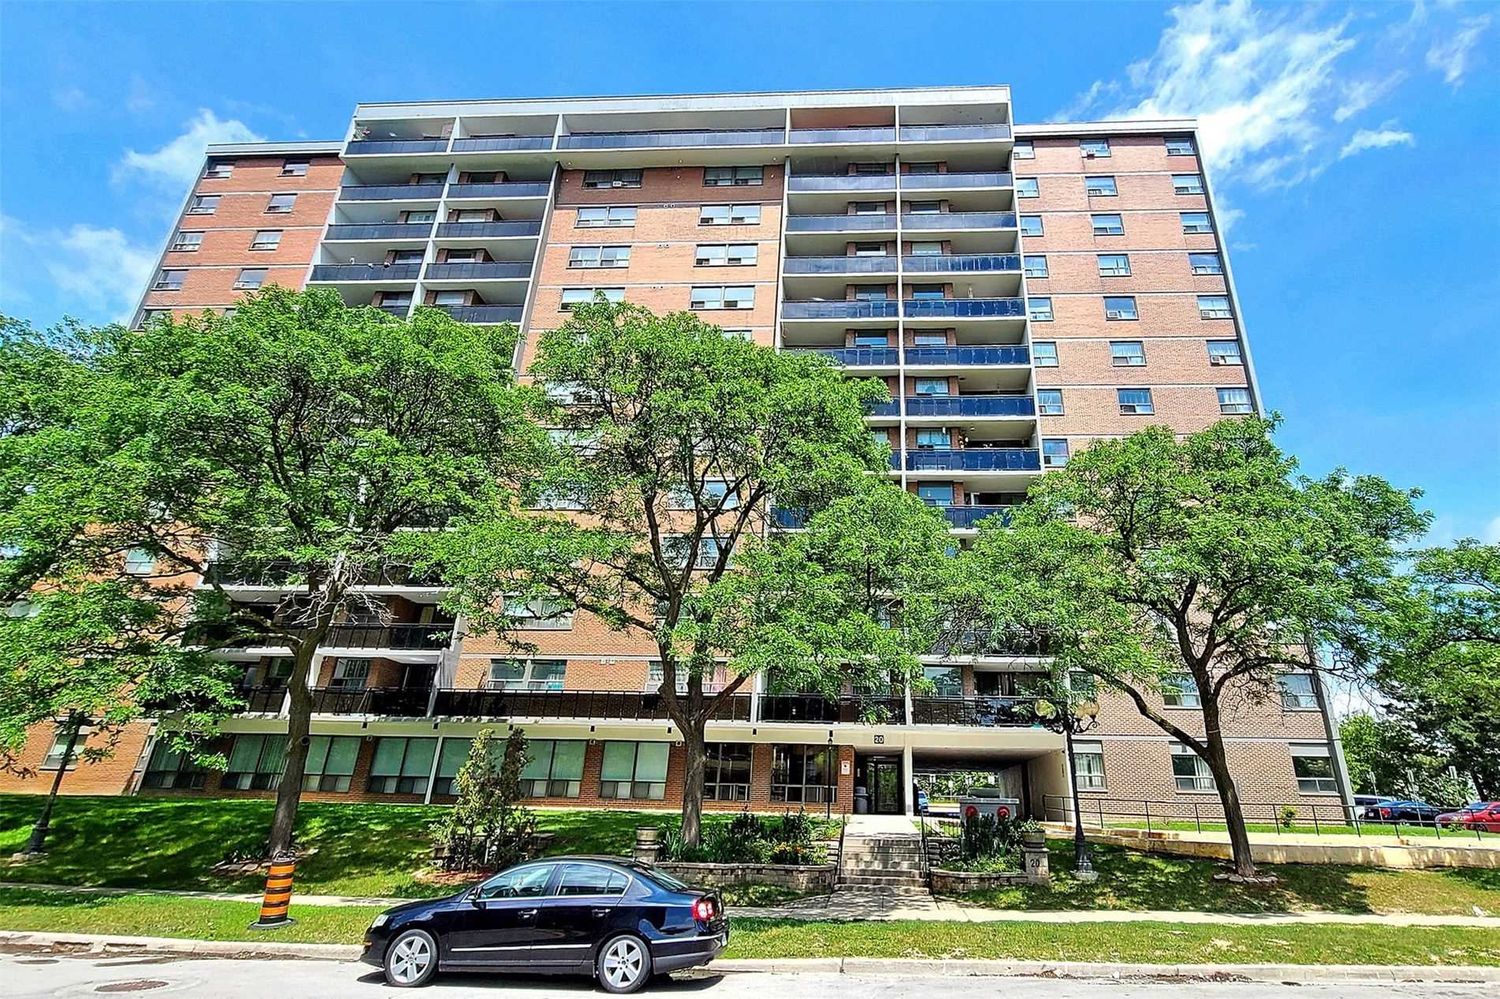 20 Gilder Drive. 20 Gilder Drive Condos is located in  Scarborough, Toronto - image #2 of 3